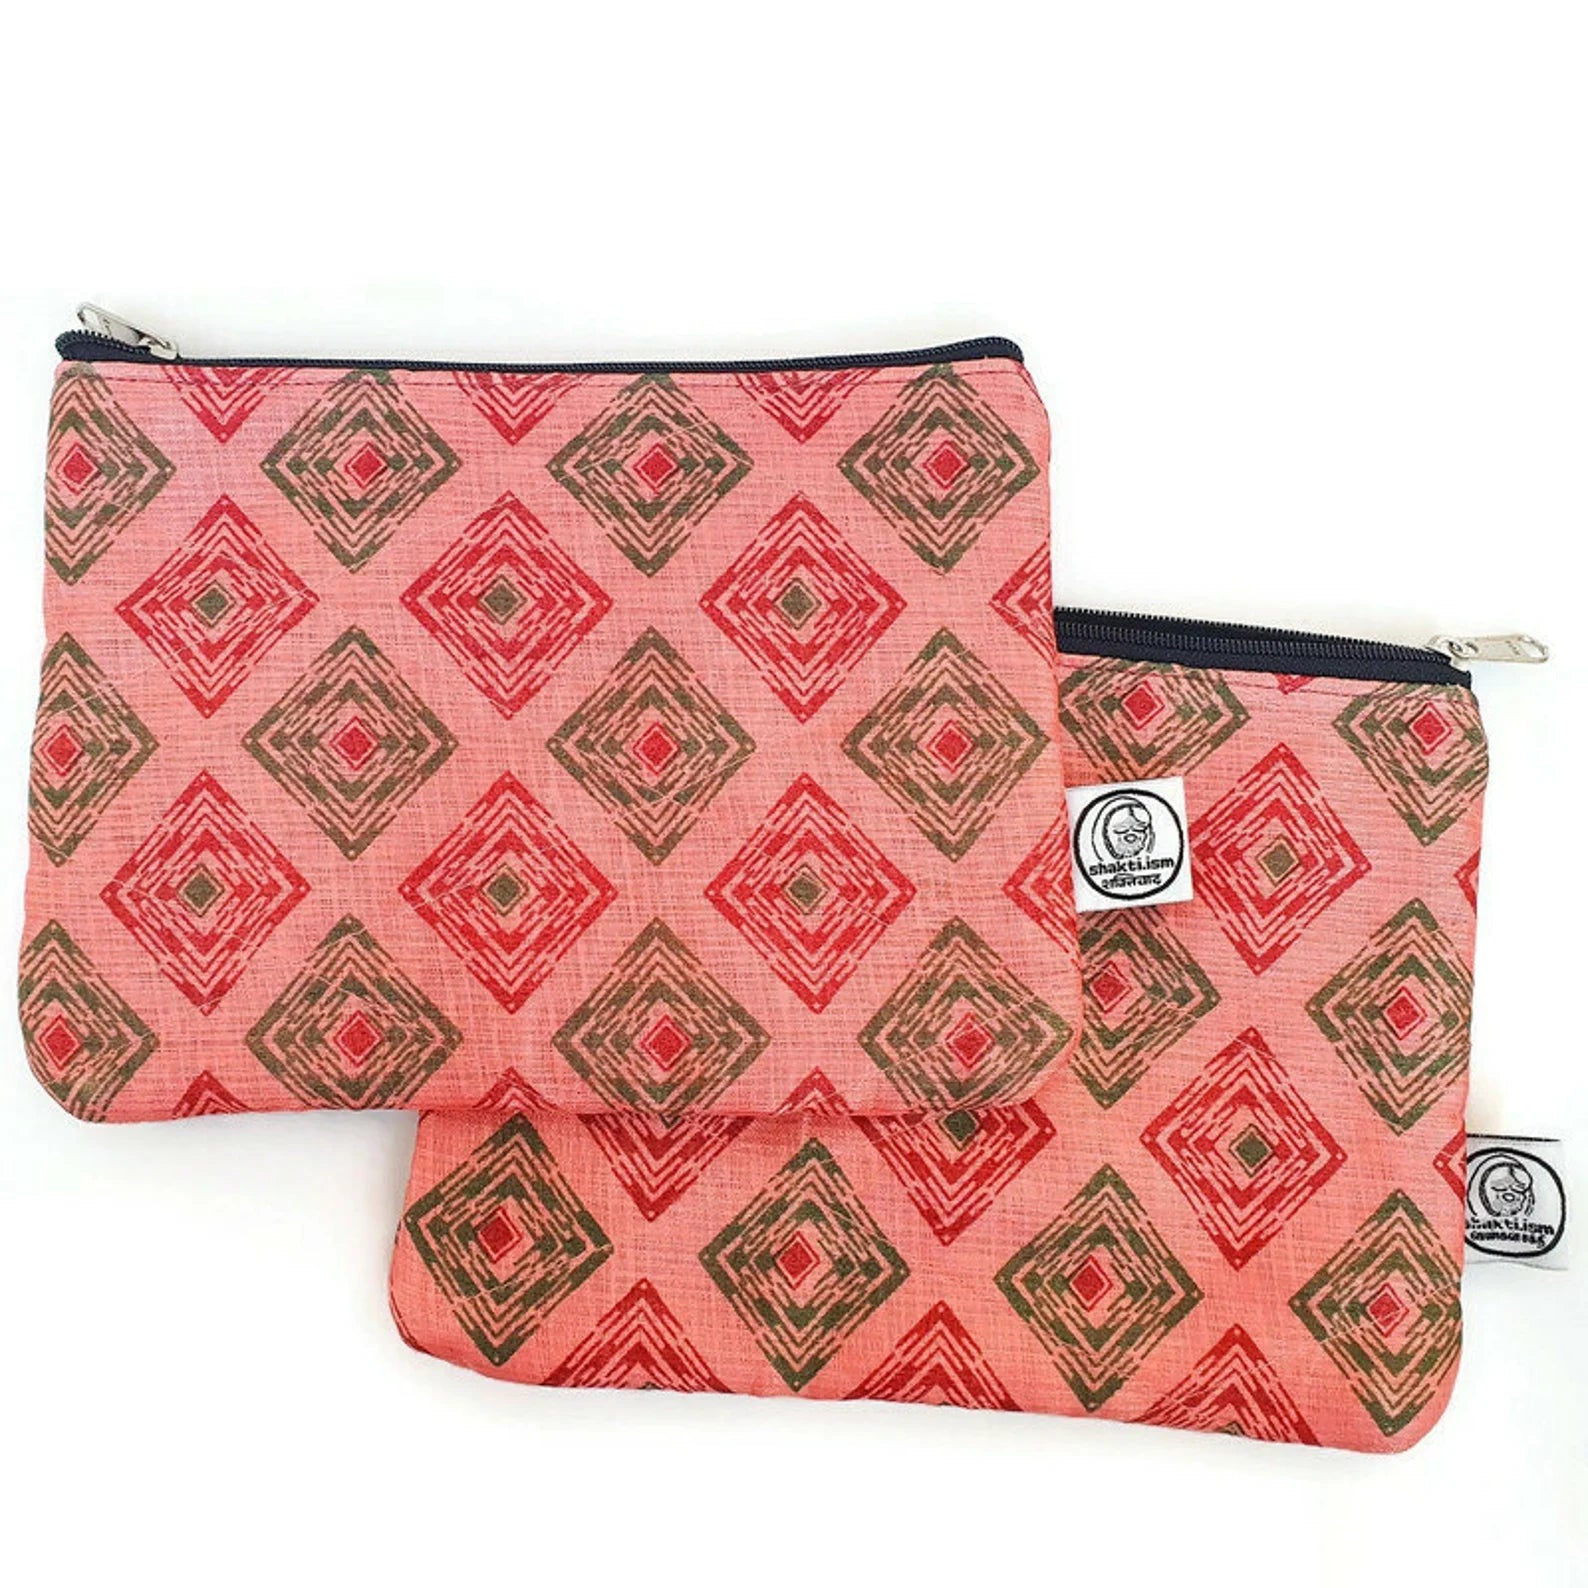 Flat upcycled sari pouch, large wallet, pink diamonds pattern